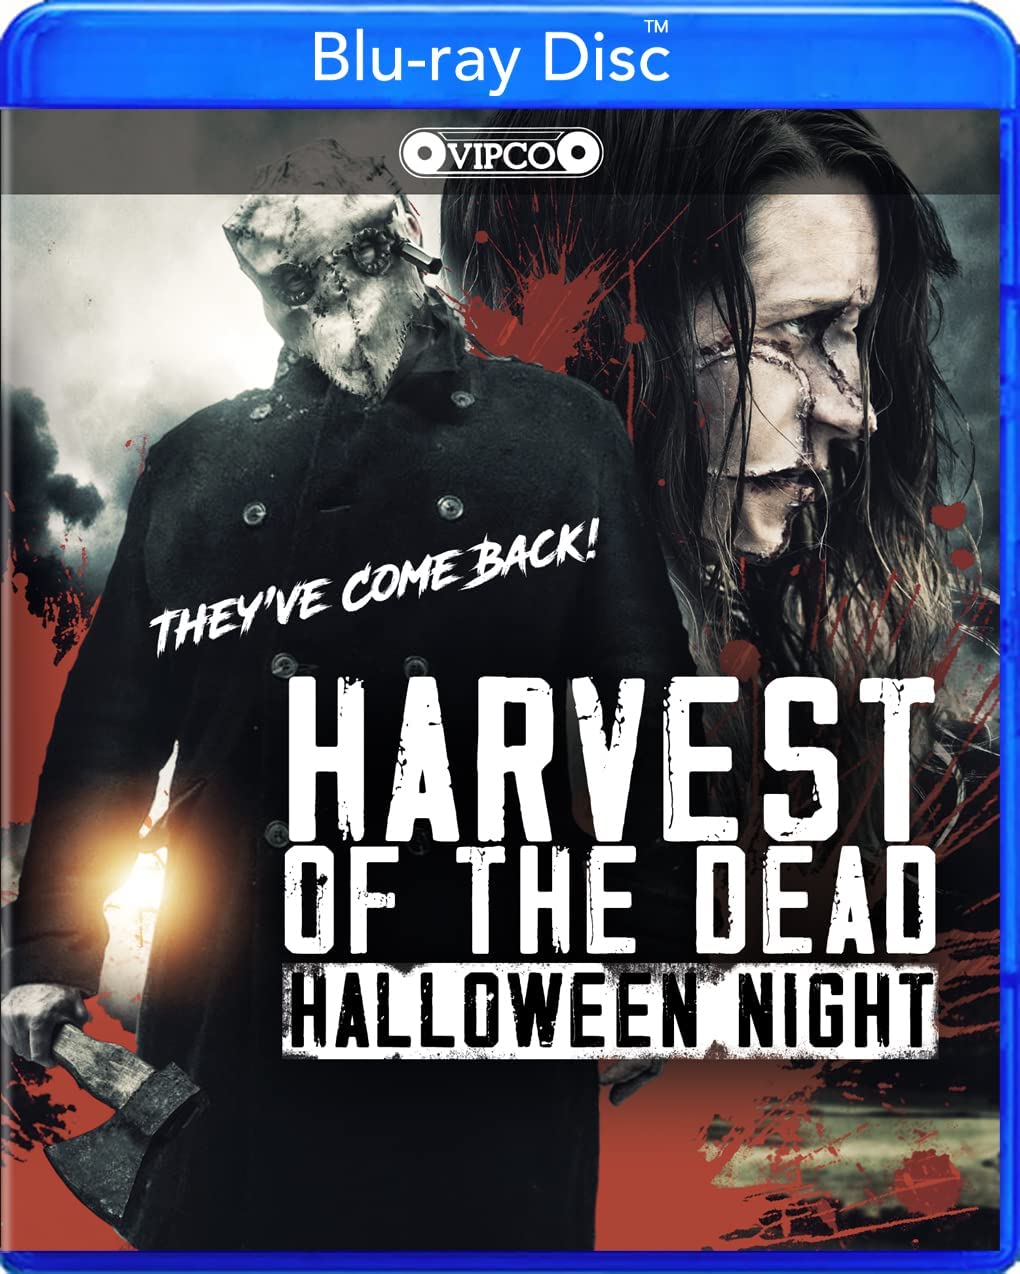 VIPCO re-release UK - Harvest of the Dead 2 BluRay